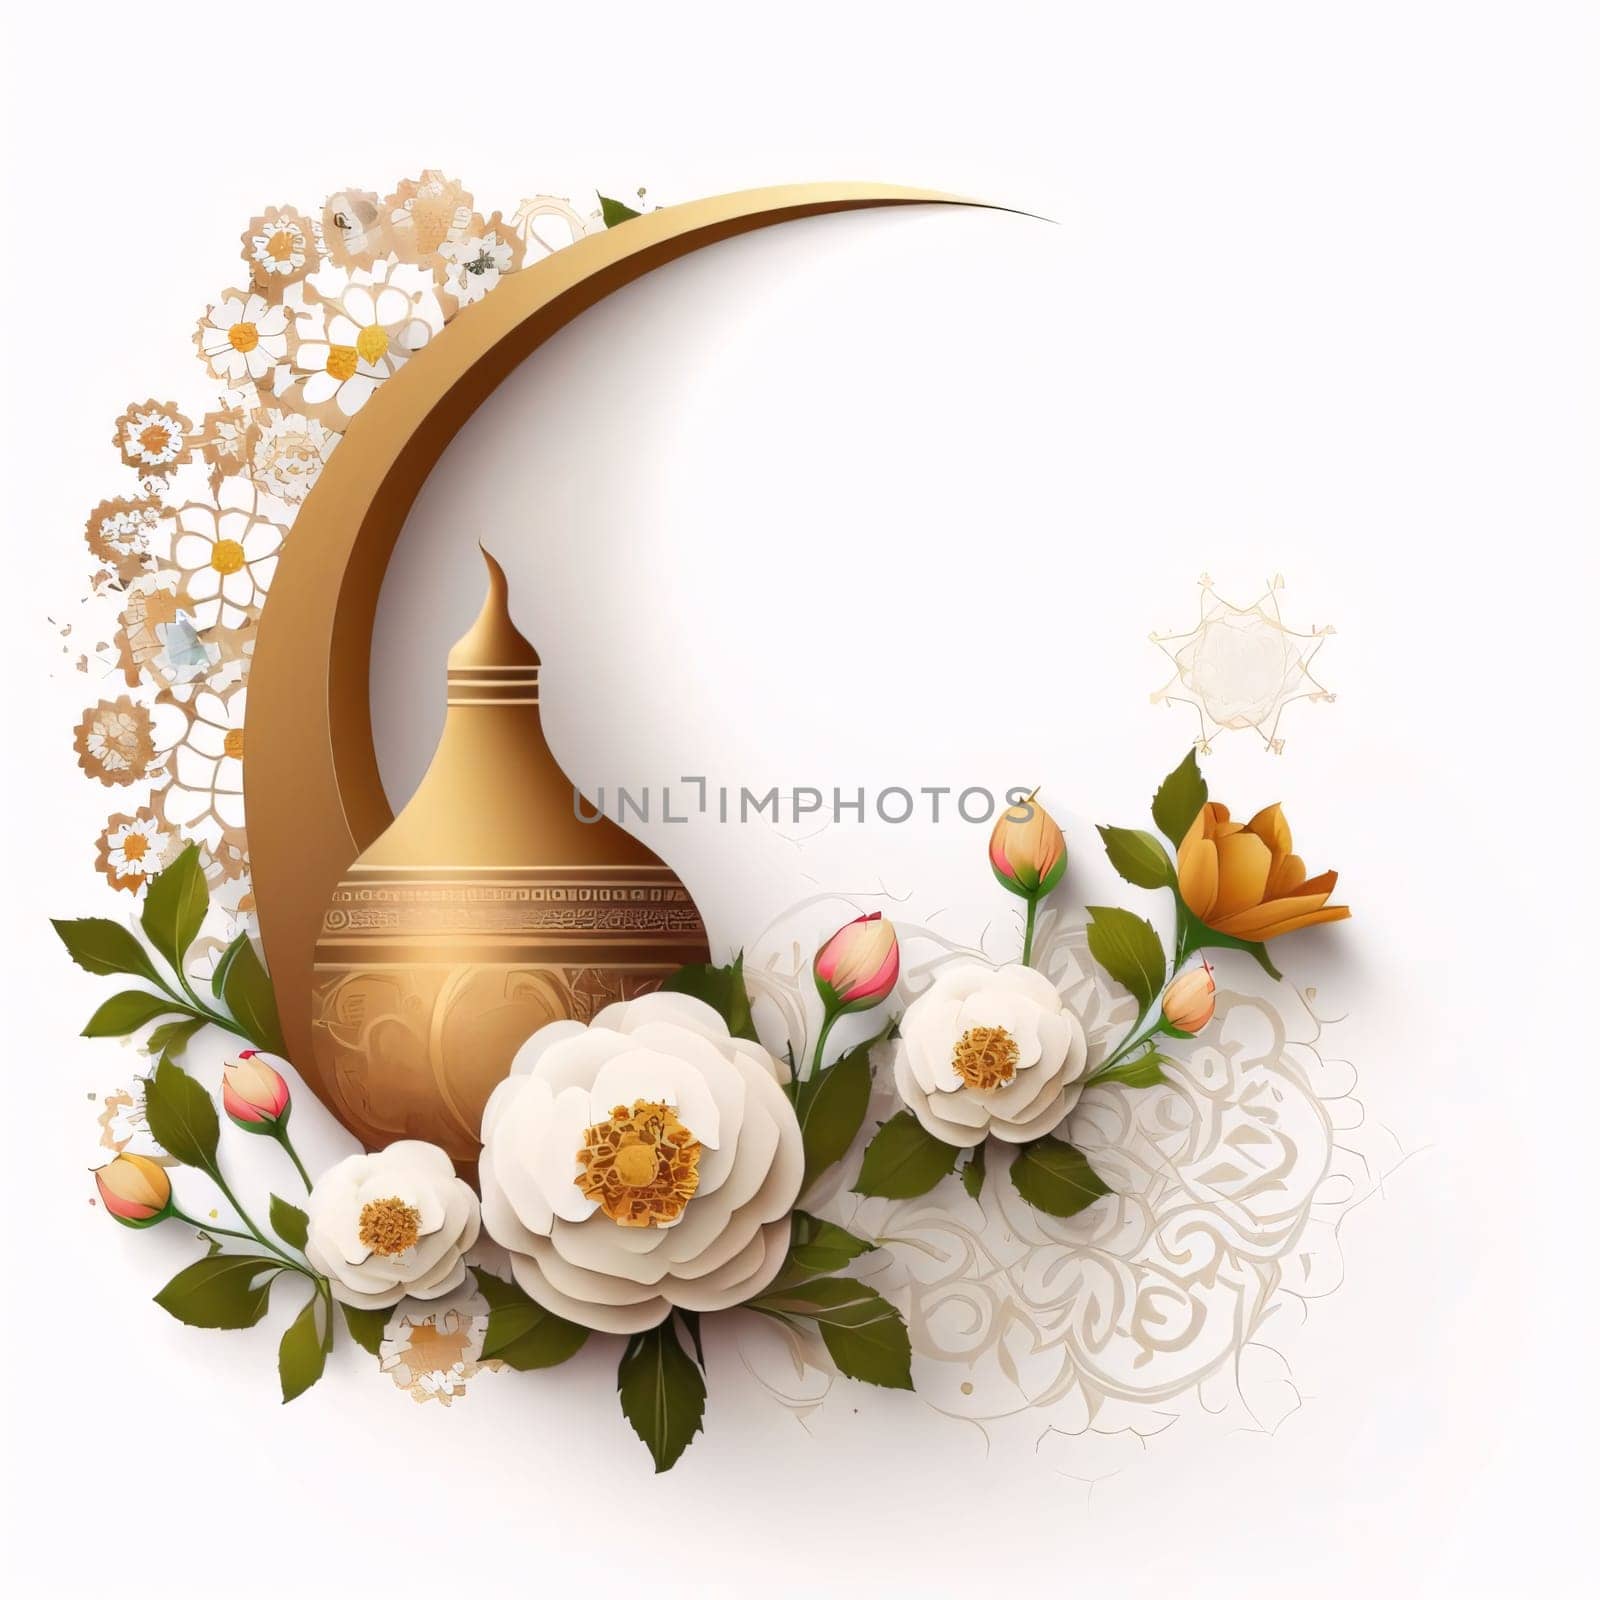 Gold Crescent decorated with white flowers with leaves white background. Lantern as a symbol of Ramadan for Muslims. A time to meet with God.